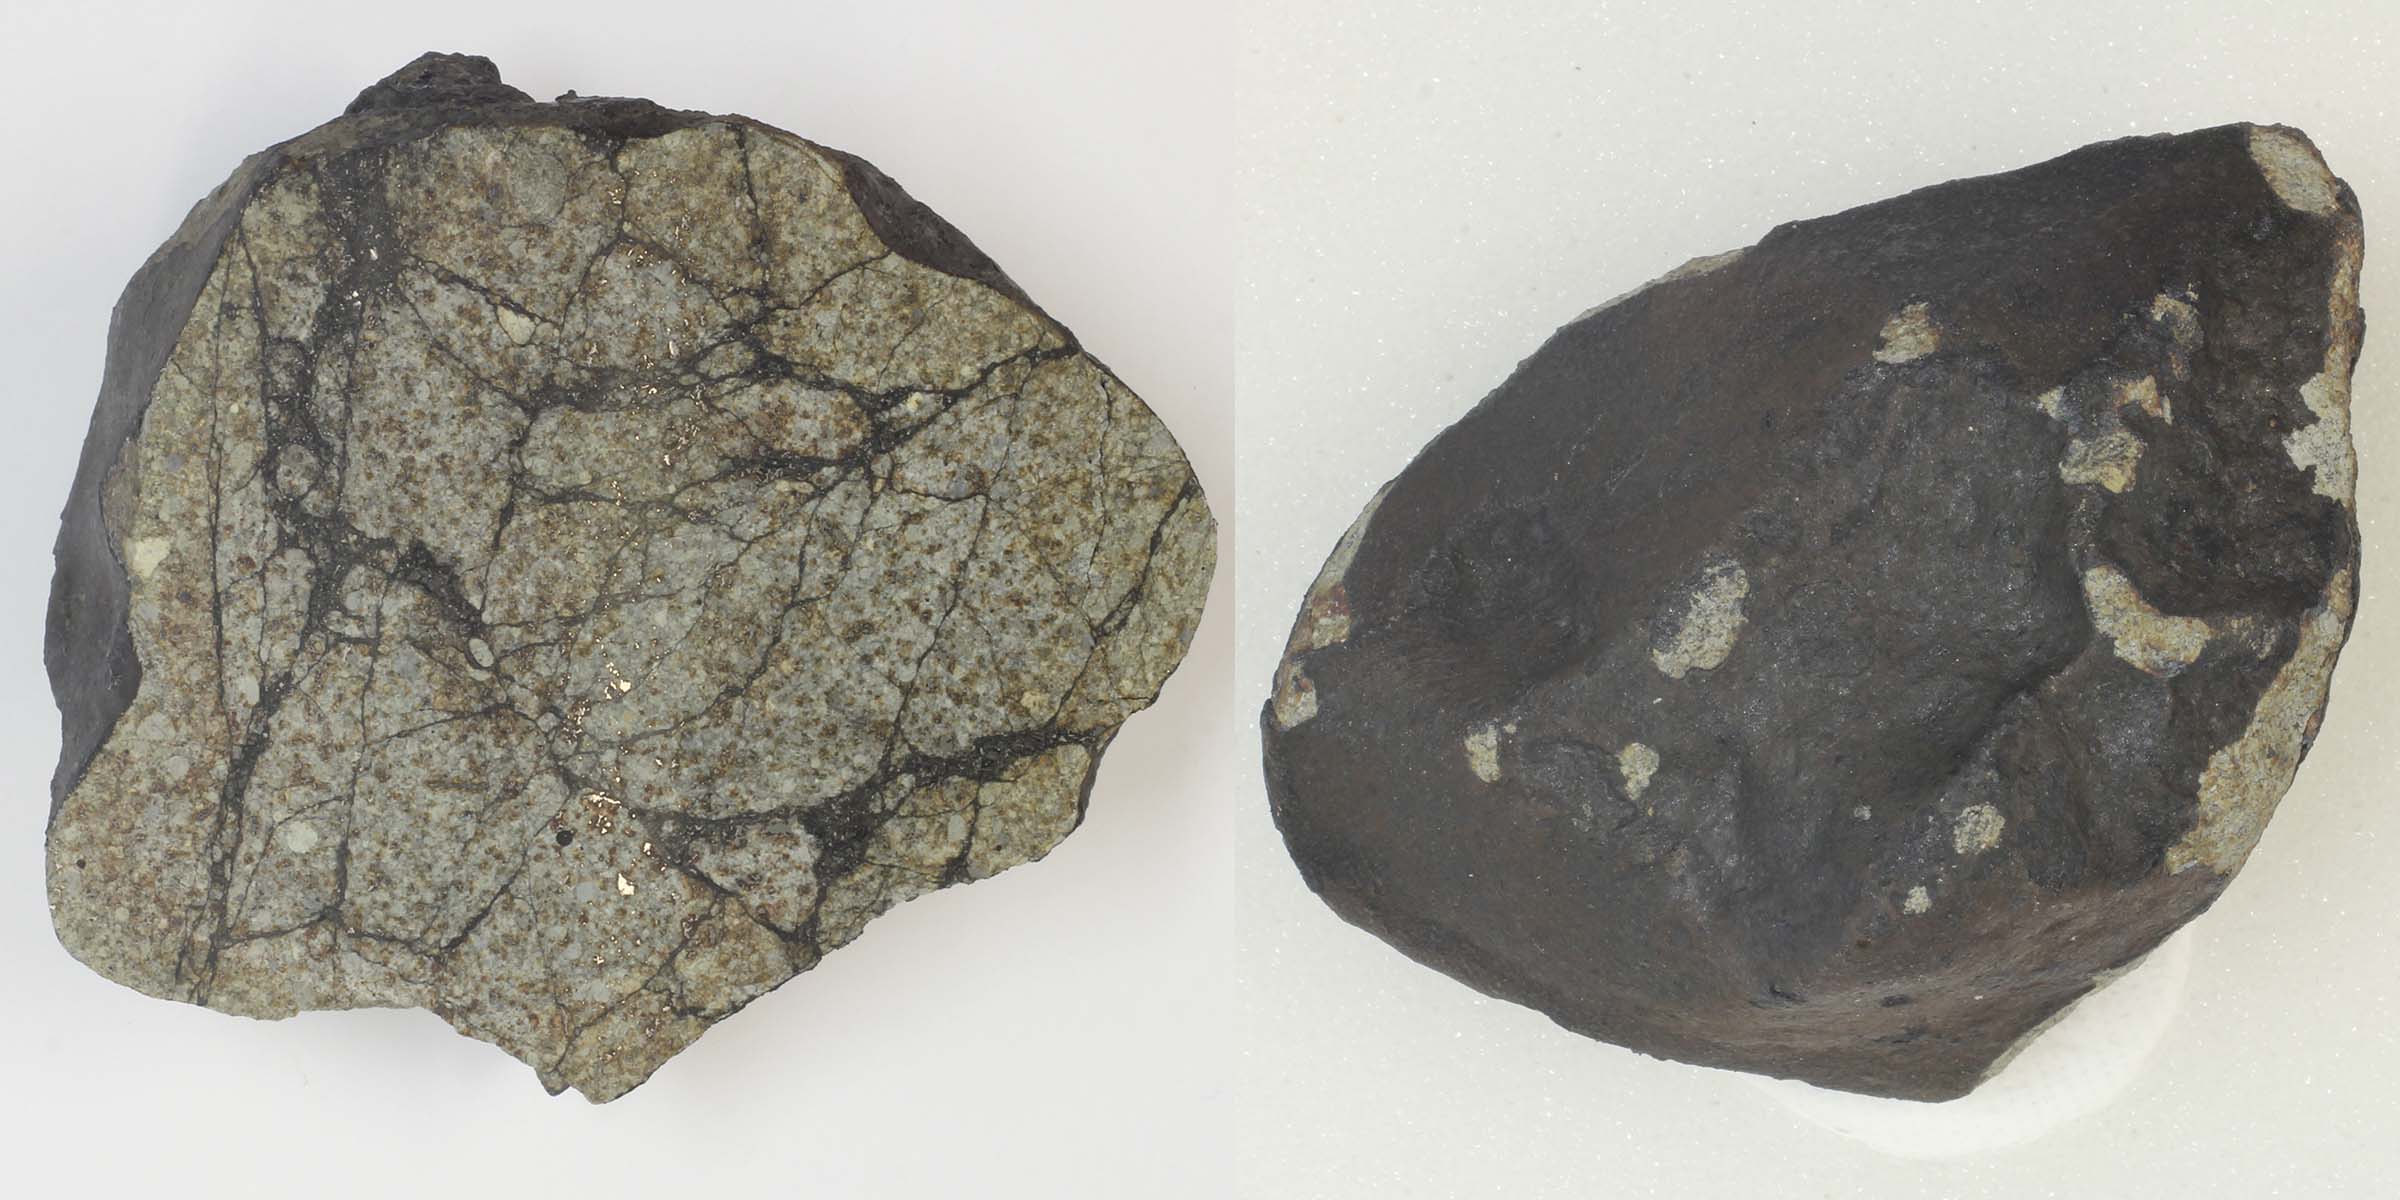 Two images, one showing the outside of a rock and the other showing the cross section, which is speckled tan, black and gold